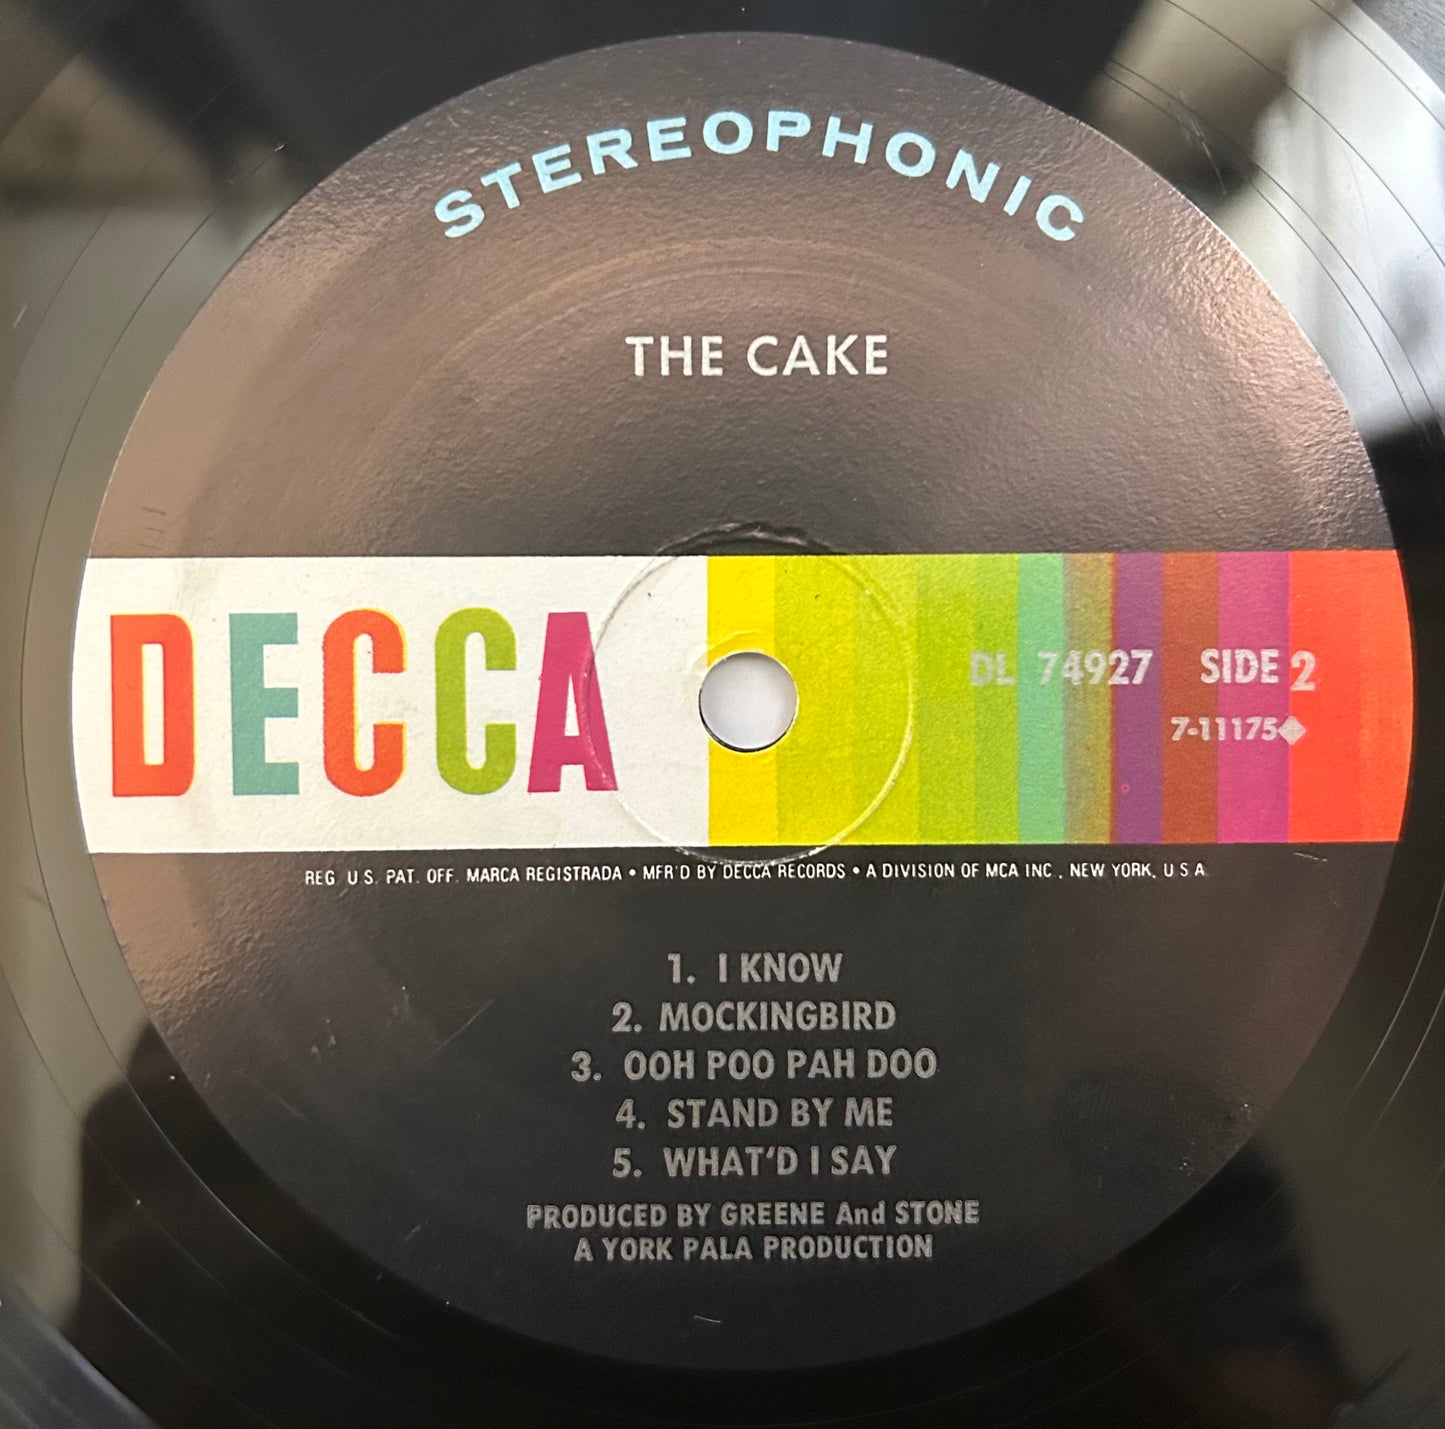 The Cake - Self Titled 1st Stereo Press 1967 Decca Soul/Psych